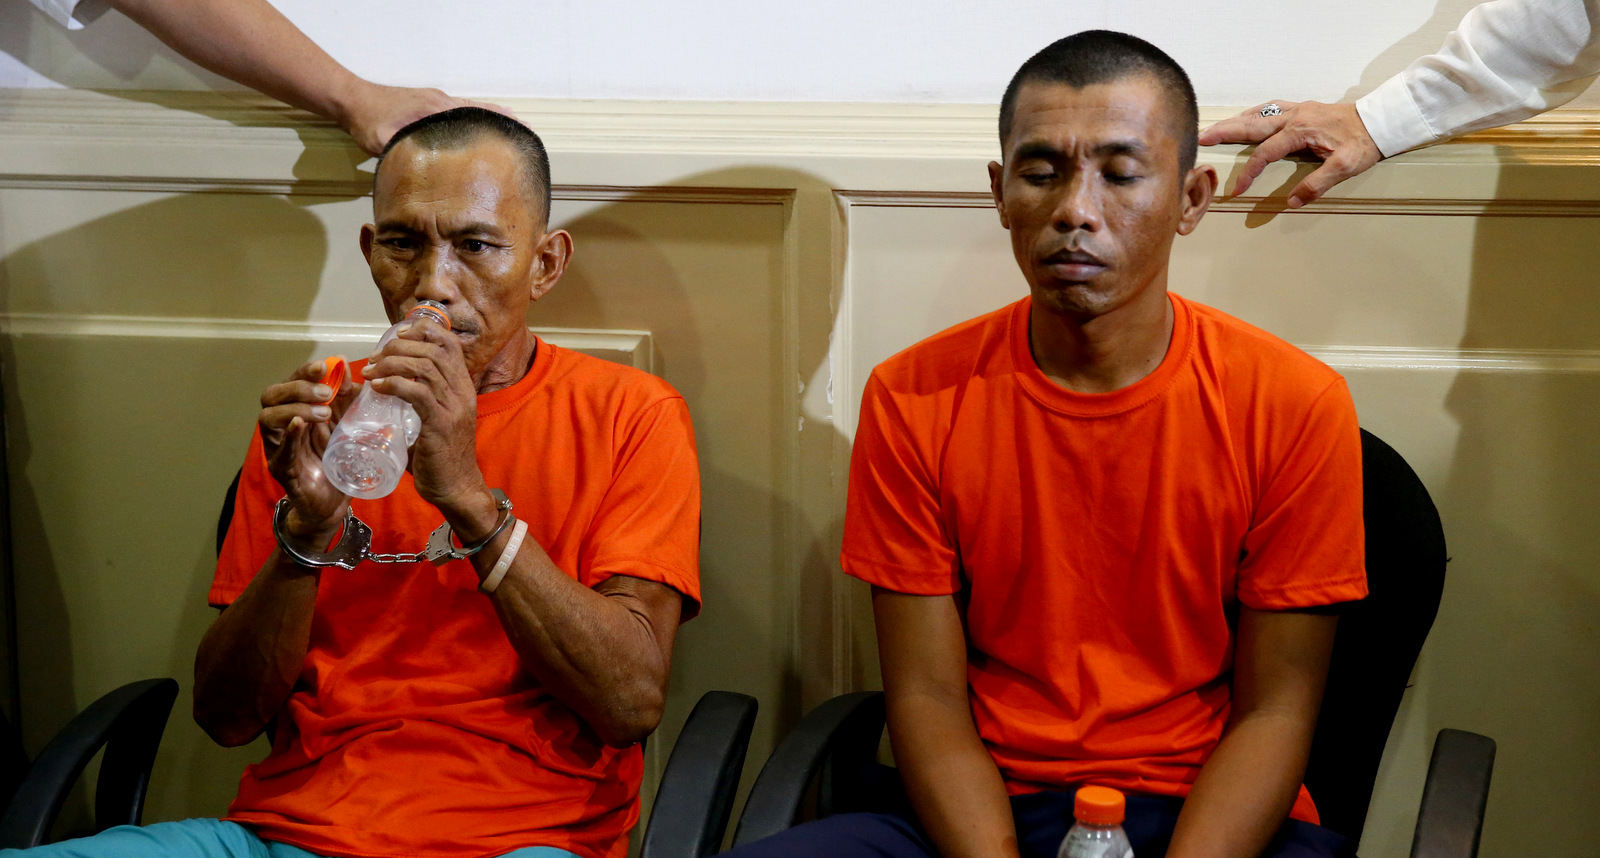 Two suspected Abu Sayyaf militants Hood Abduallah, left, and Jimmy Bla wait to be presented to the media by Justice Secretary Vitaliano Aguirre in a news conference at the National Bureau of Investigation headquarters Monday, March 12, 2018 in Manila, Philippines. In the Justice Department press statement, the two were arrested two weeks ago in Zamboanga, southern Philippines and allegedly were involved in kidnappings in 2001 and 2002 including that of American missionaries Martin and Gracia Burnham. (AP Photo/Bullit Marquez)